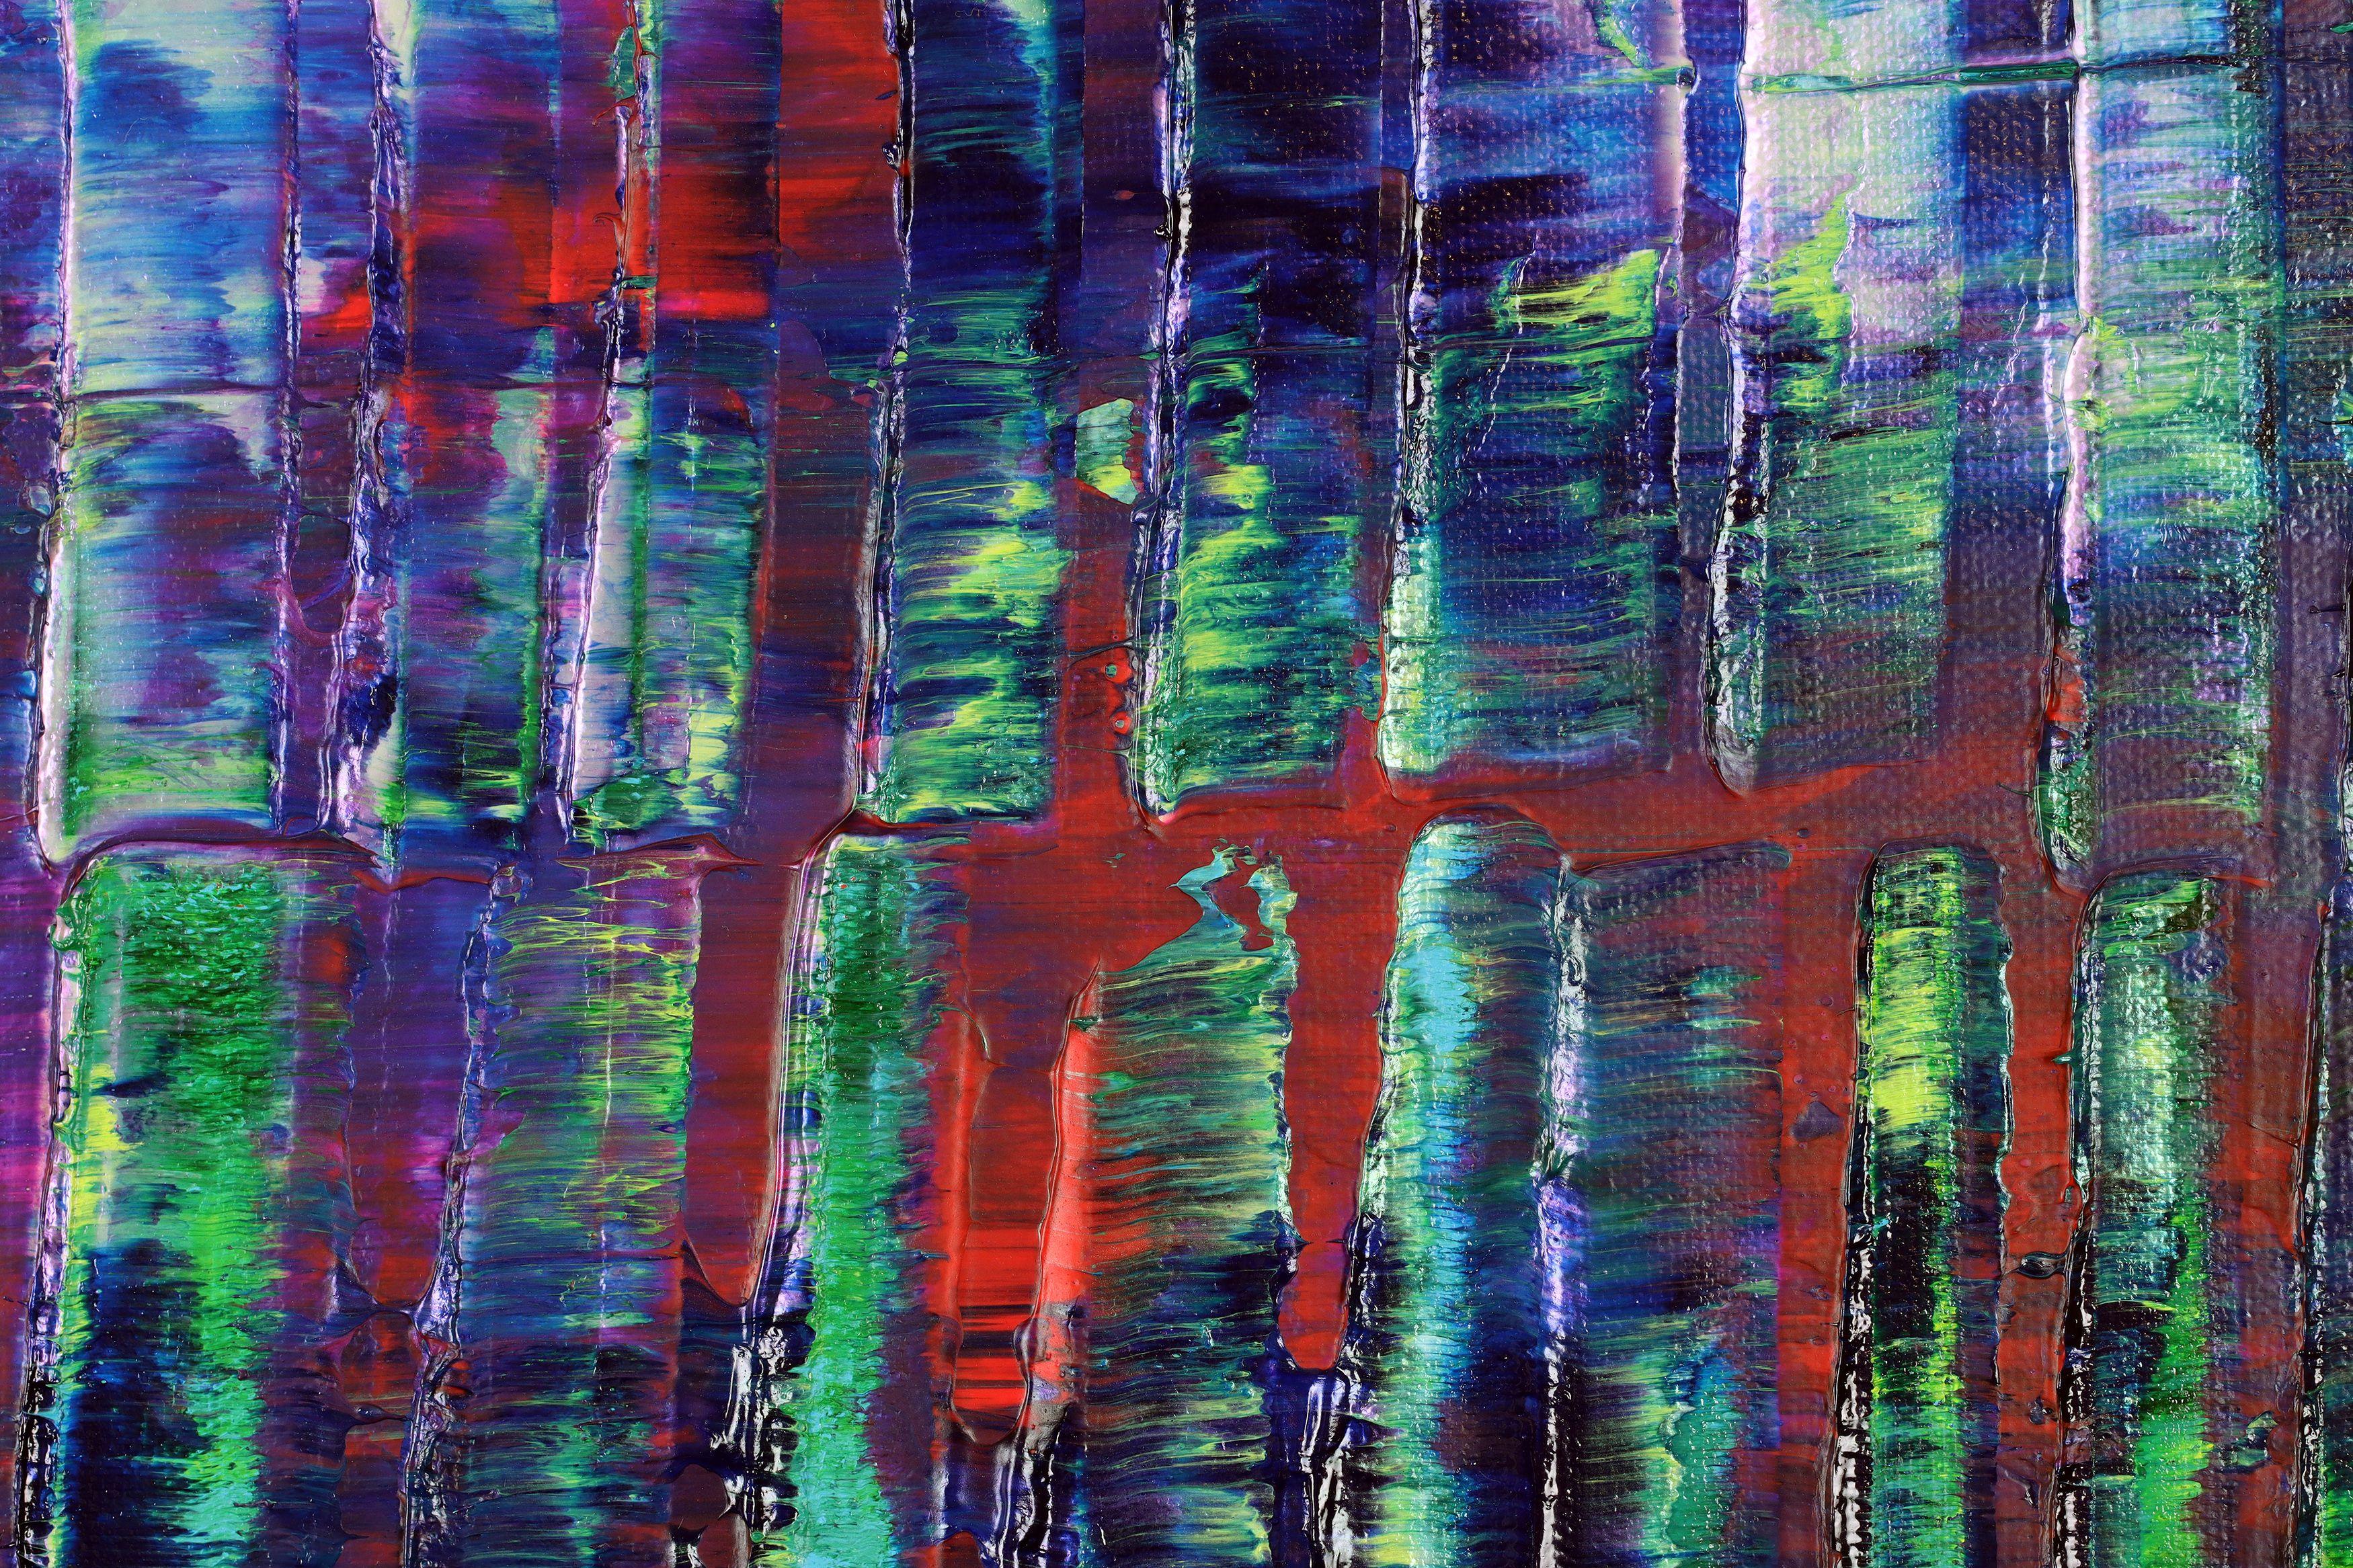 Abstract iridescent painting  acrylic on canvas    This artwork was created layering and blending layers of many shades of green, red, magenta, and green iridescent mica particles. This painting is very dimensional and has changes in tones with